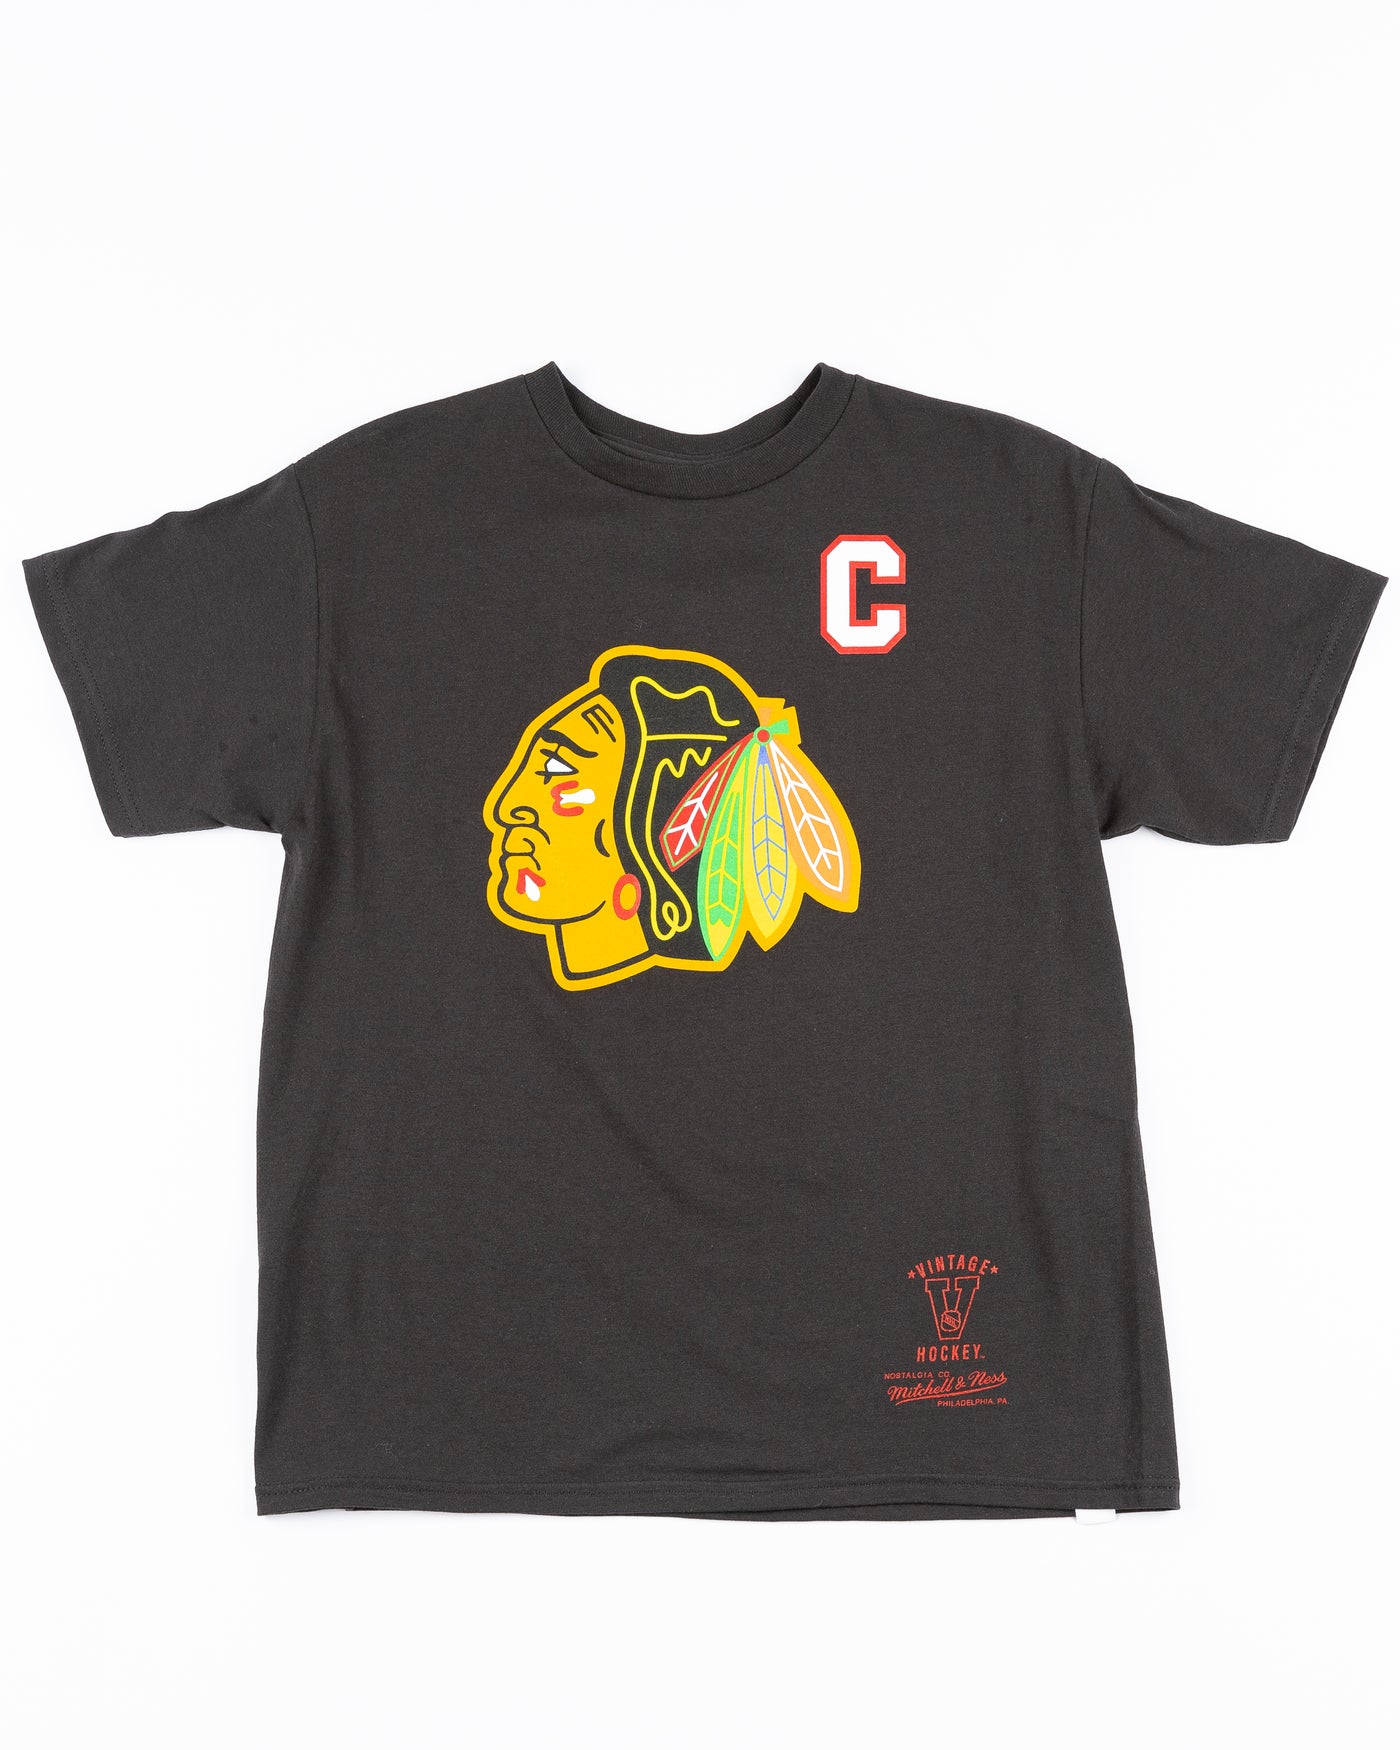 black Mitchell & Ness youth player tee of Chris Chelios inspired by vintage jersesy - front lay flat